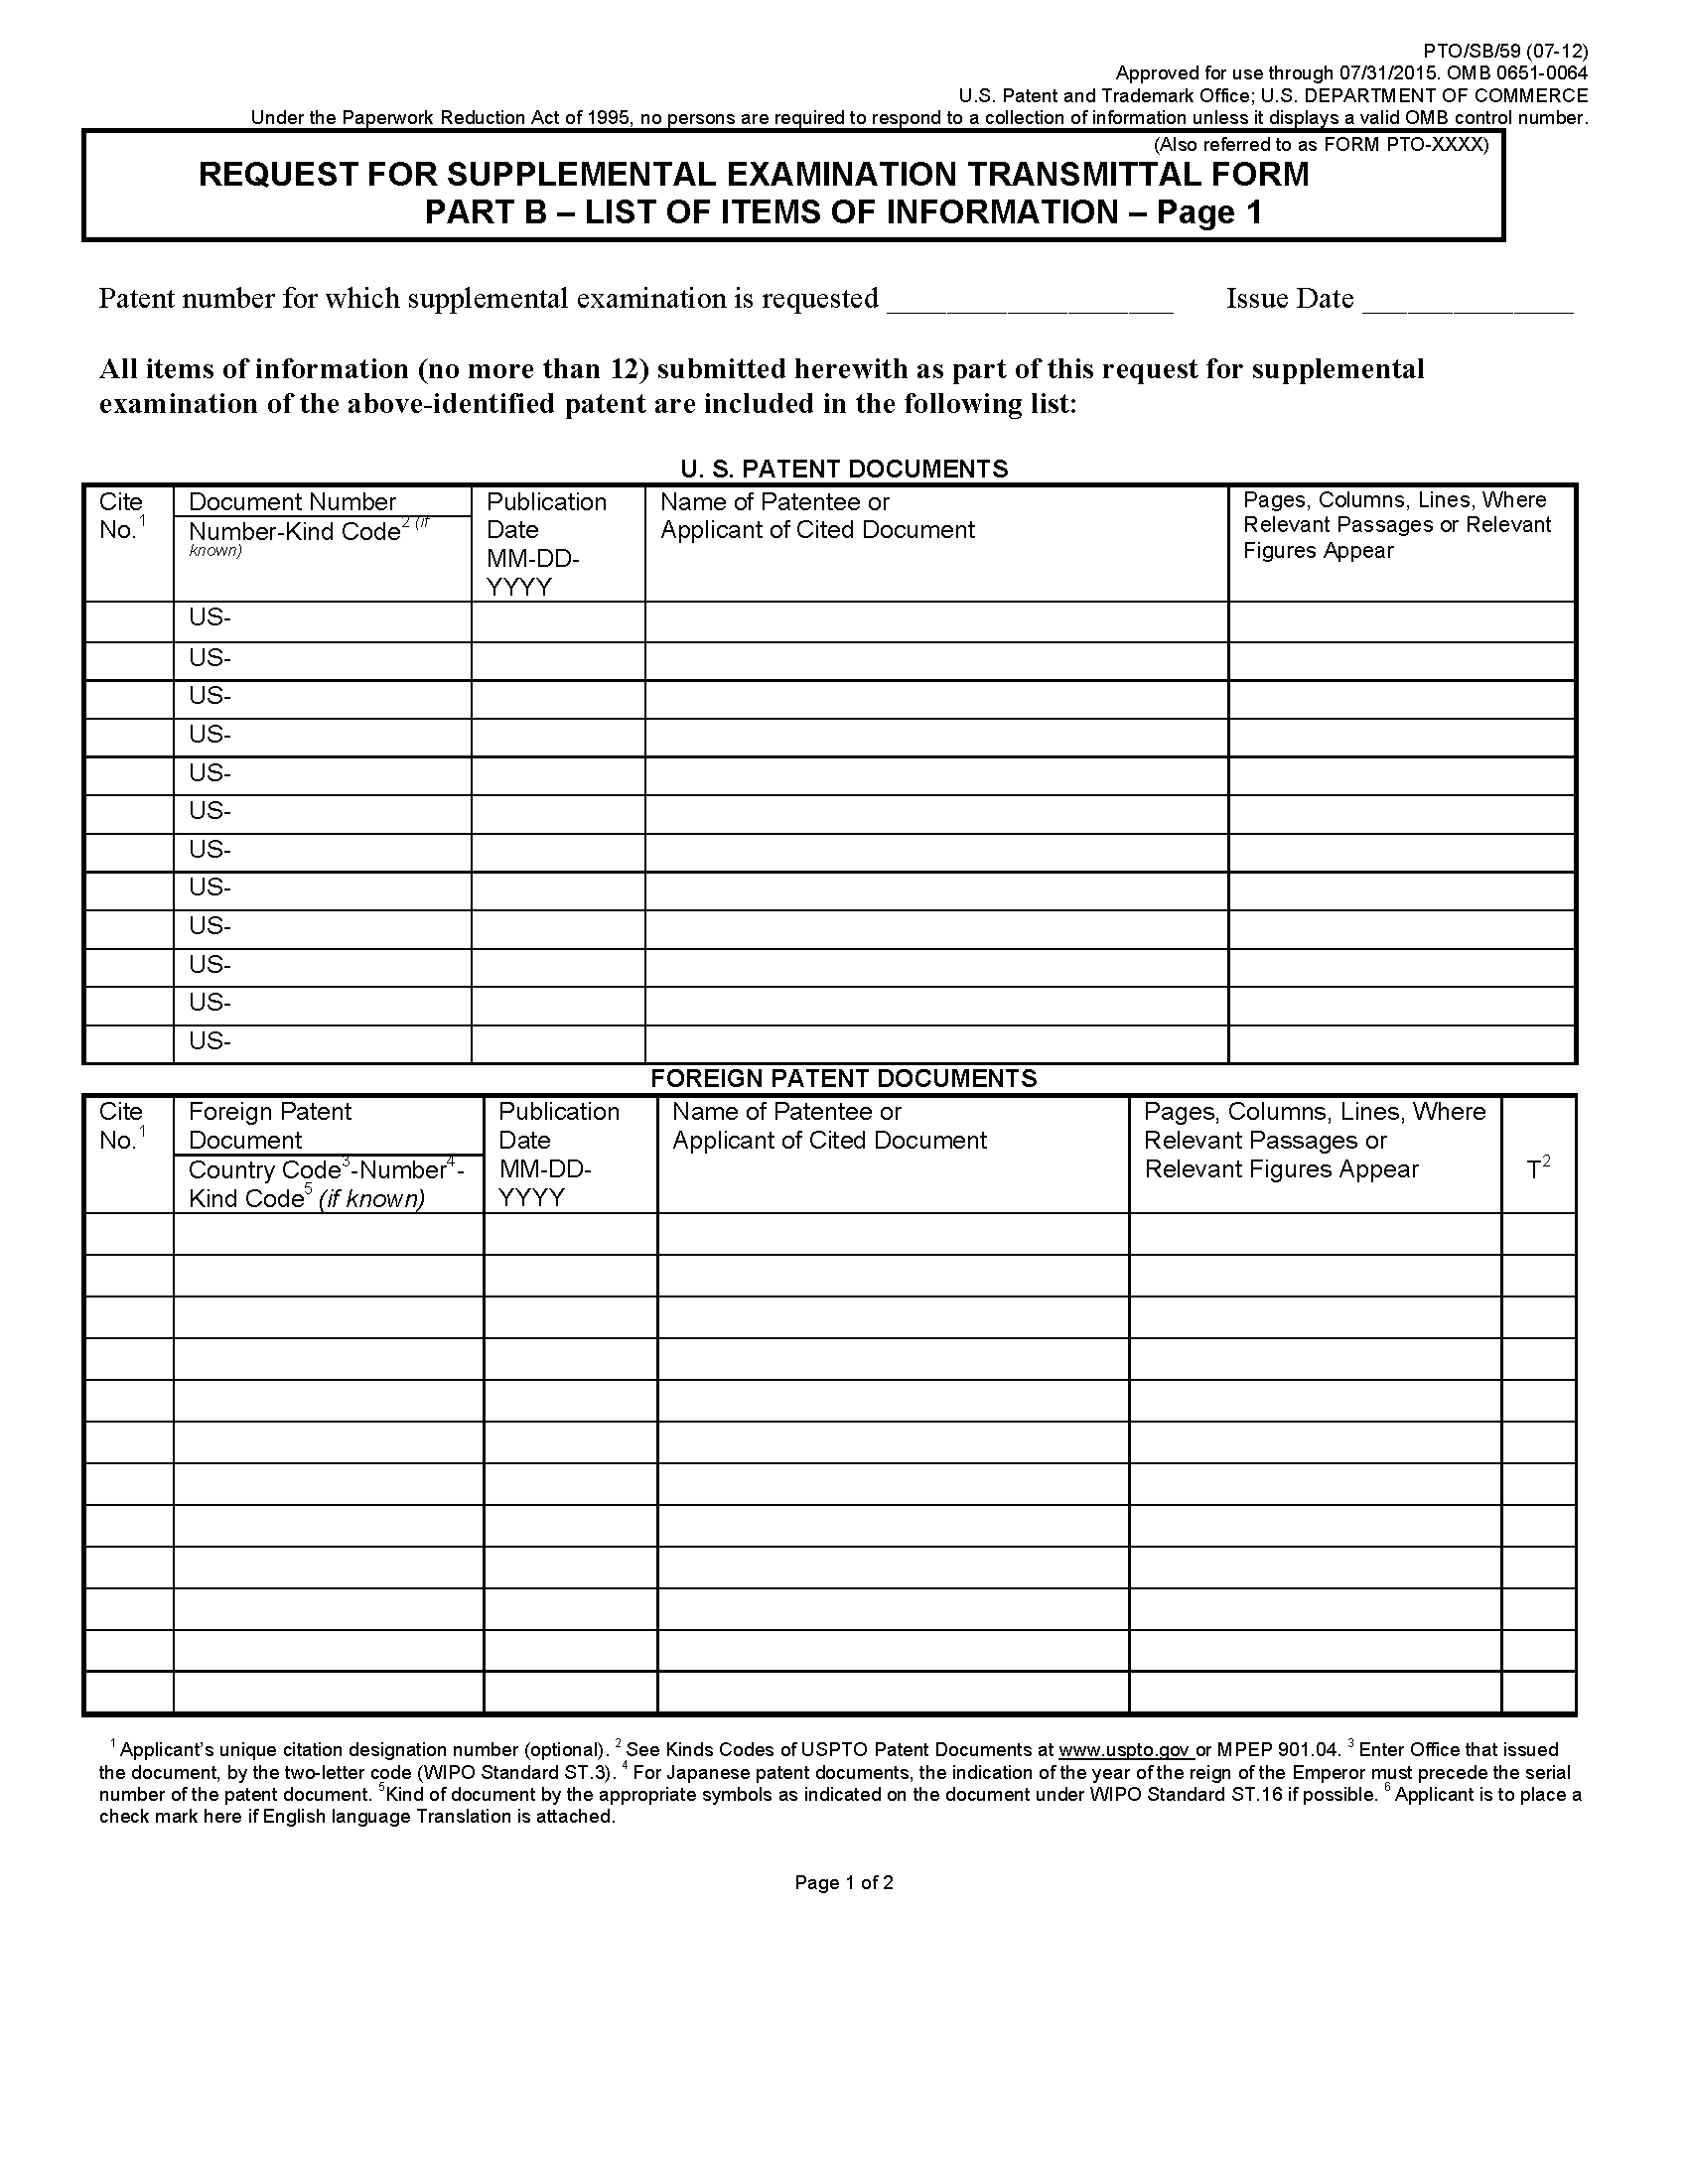 Form PTO/SB/59. Page 1 of 2. Request for Supplemantal Examination Transmittal Form - Part B. List of Items of Information.